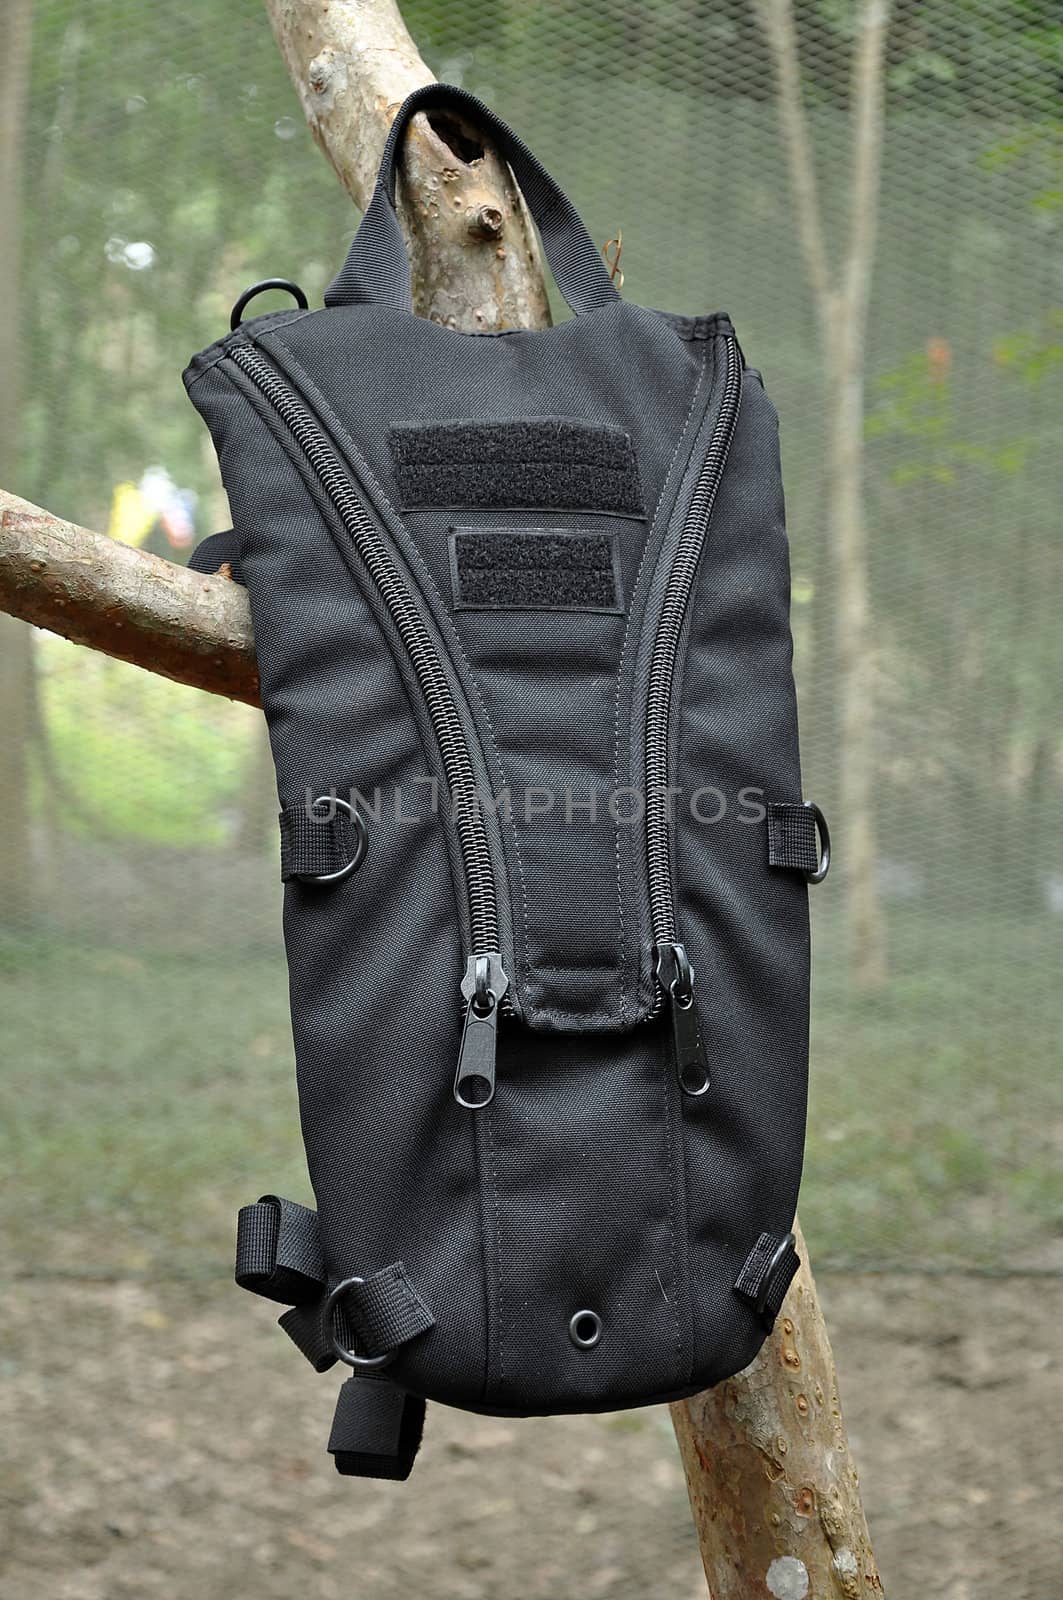 The Camelback hydration system or camel bag is backpack containing drinking water. The wearer is able to suck out the water from a tube, keeping their hands free. Camelbacks are used by various militaries.